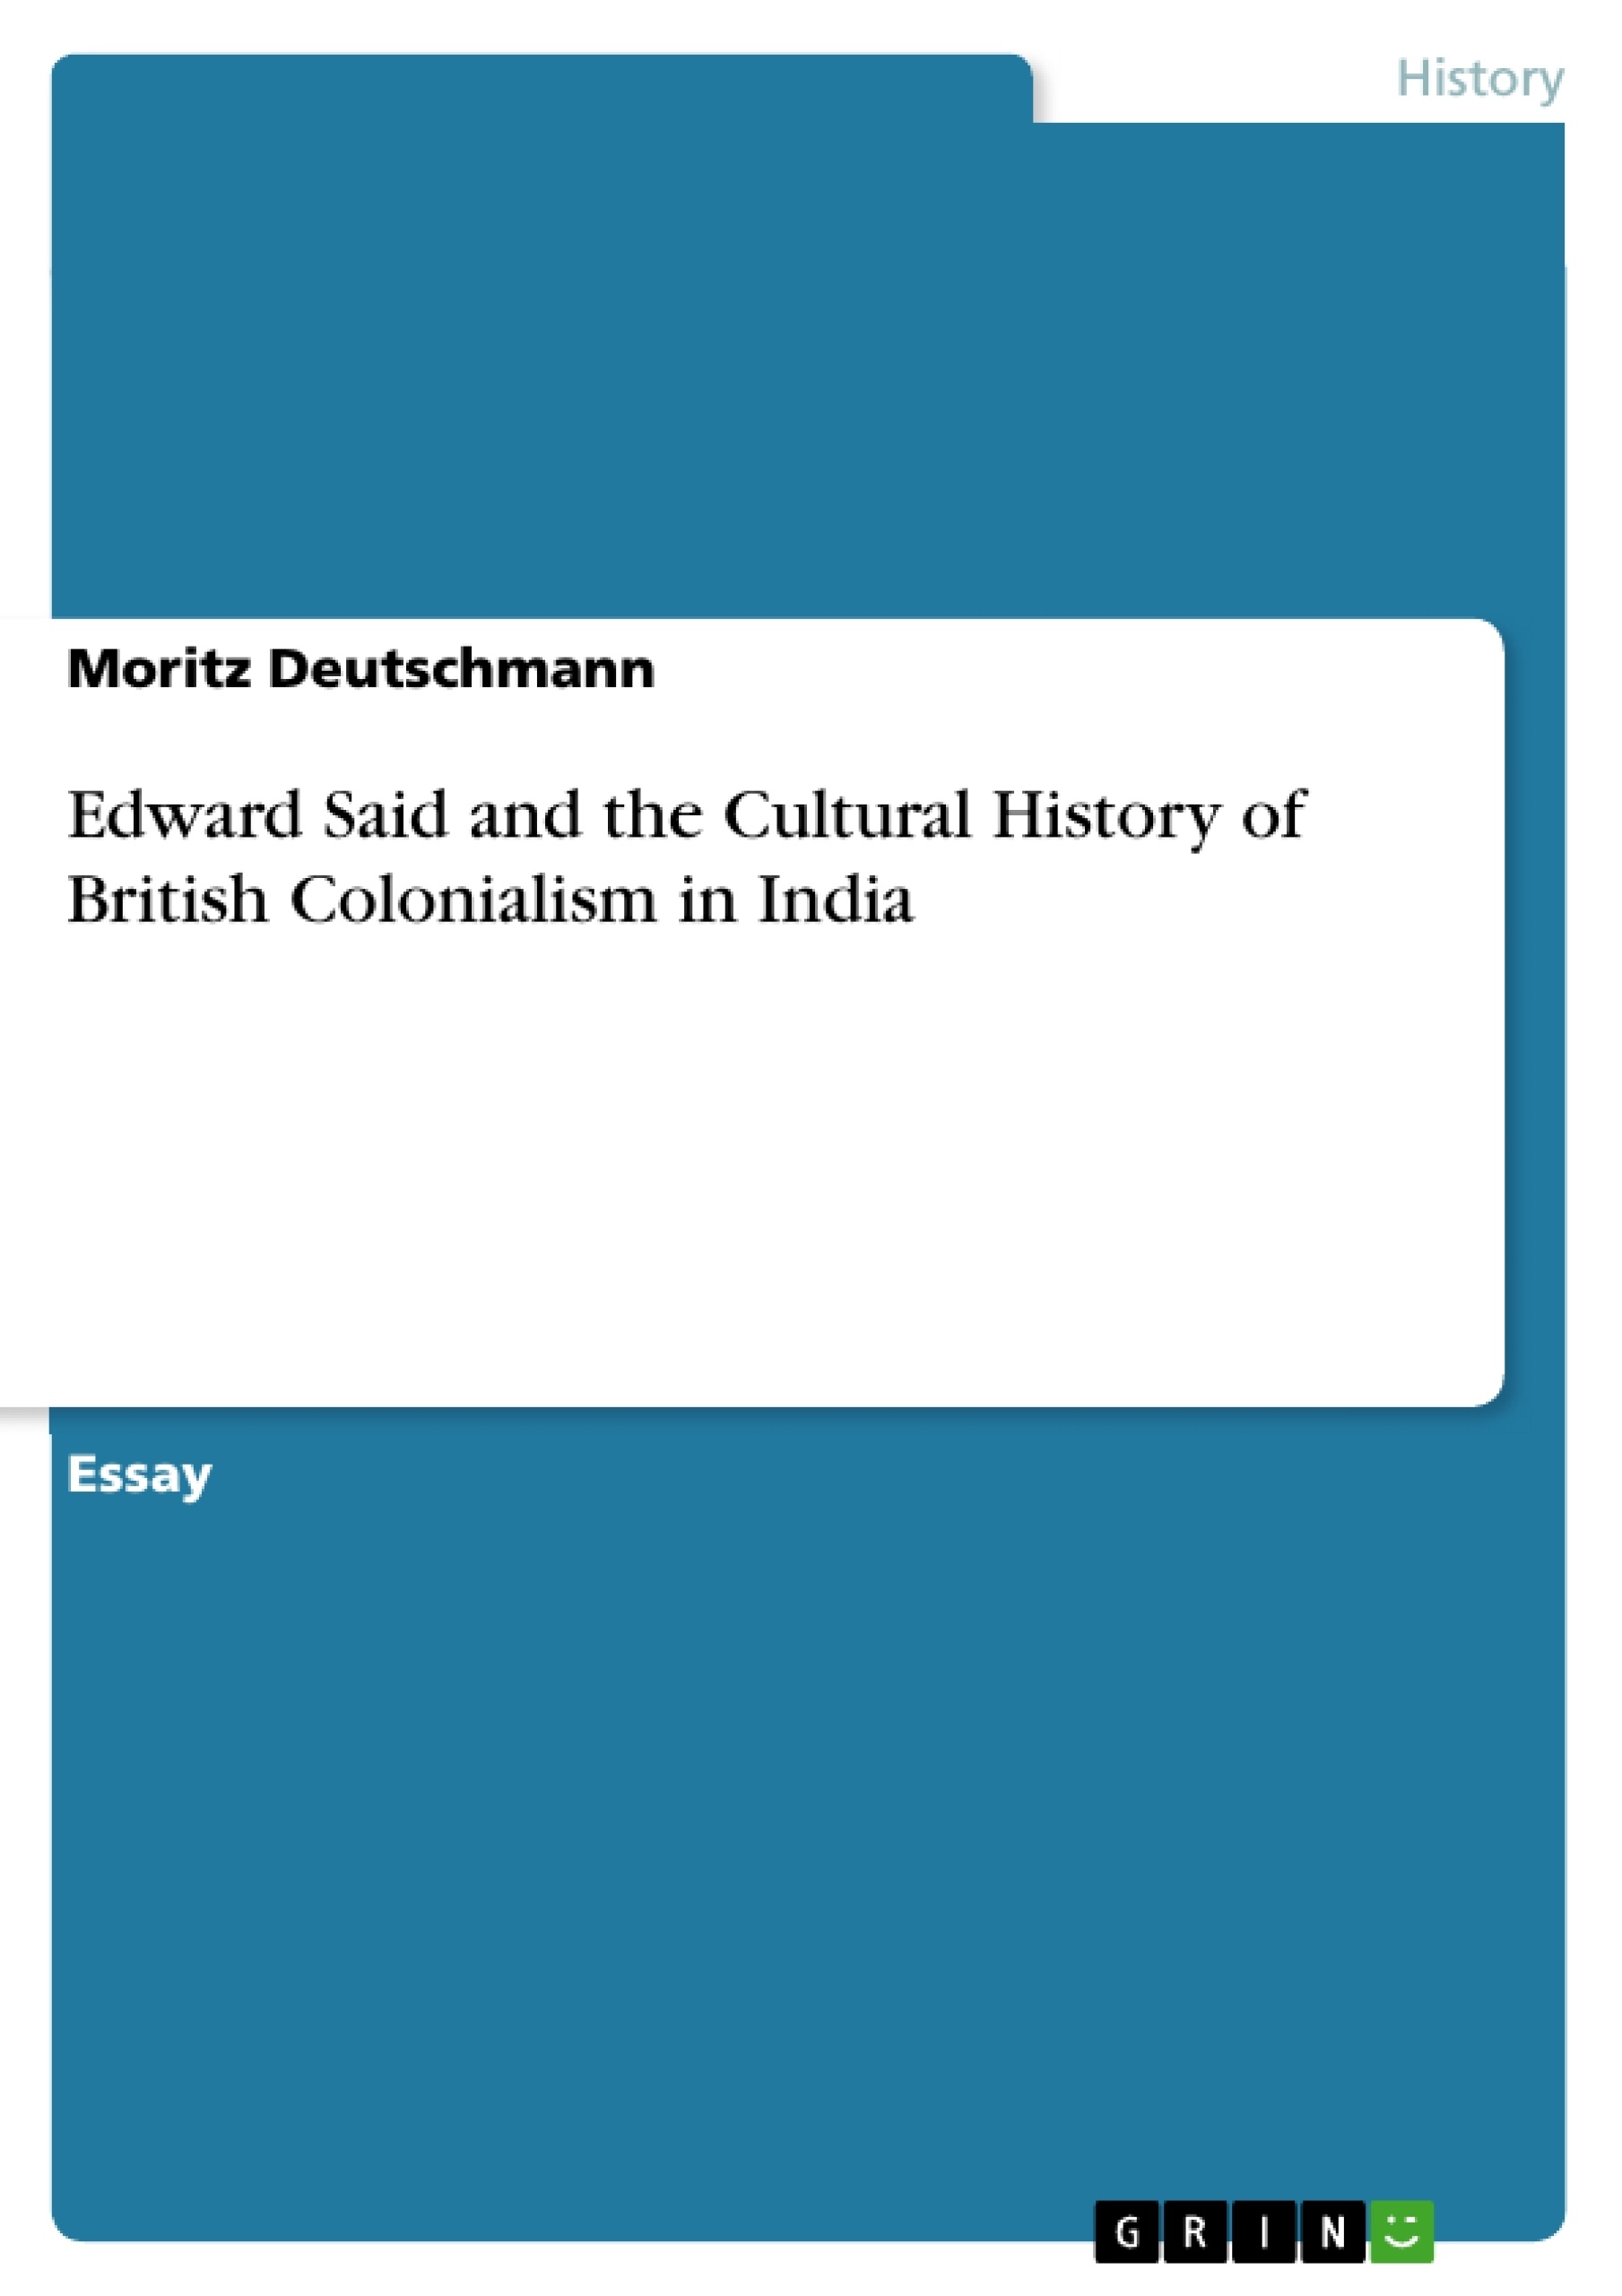 Título: Edward Said and the Cultural History of British Colonialism in India